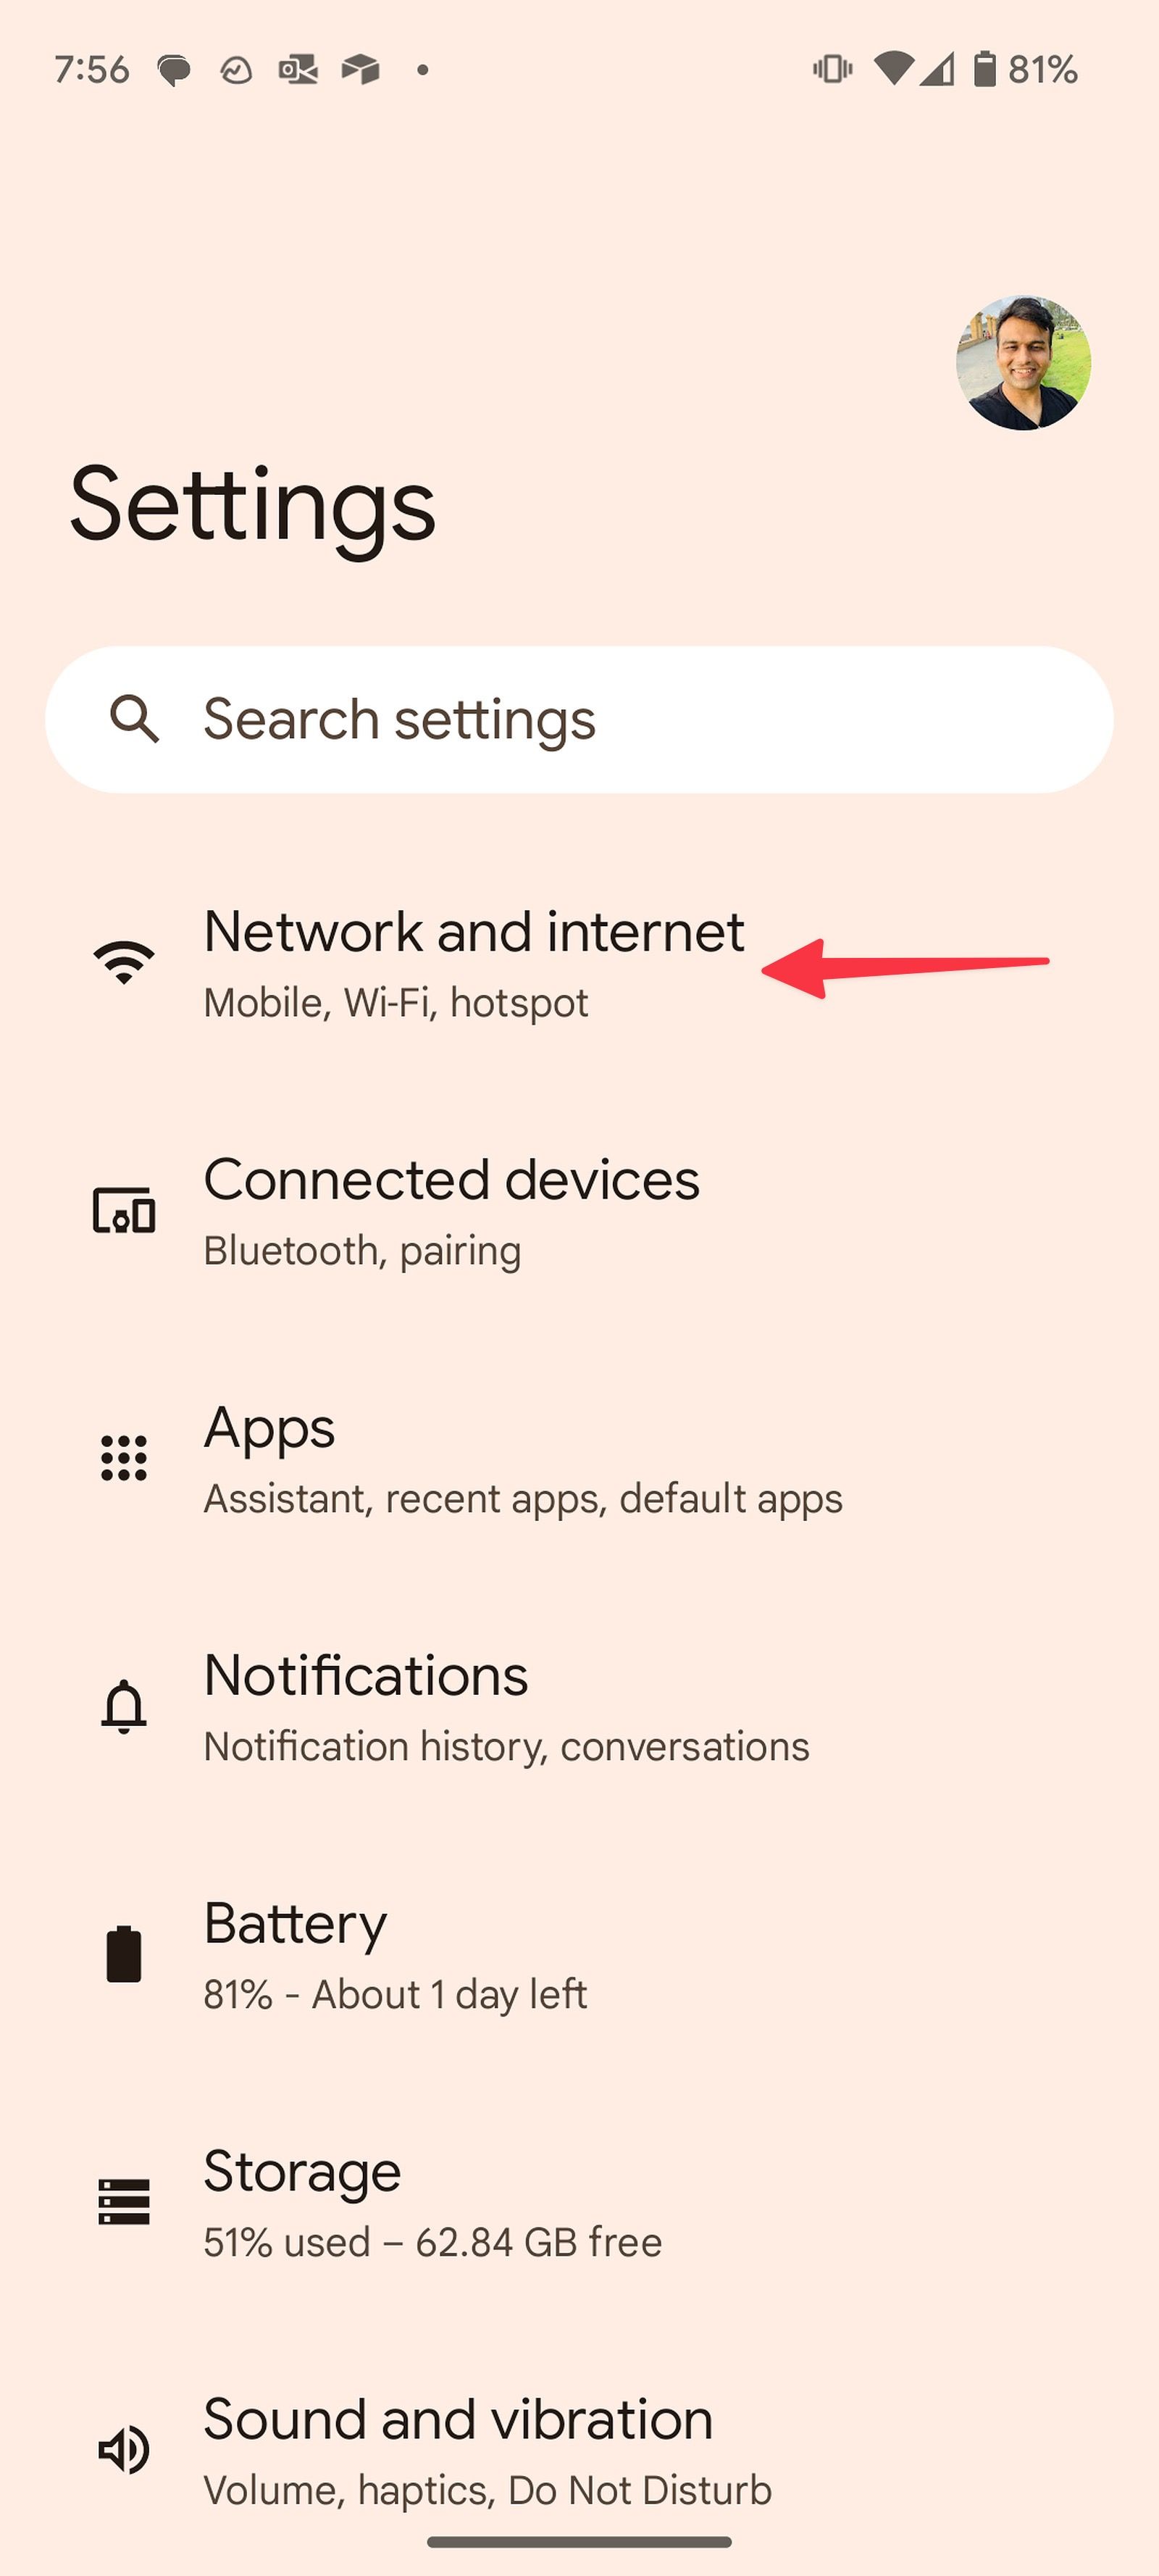 Open network and internet on Android